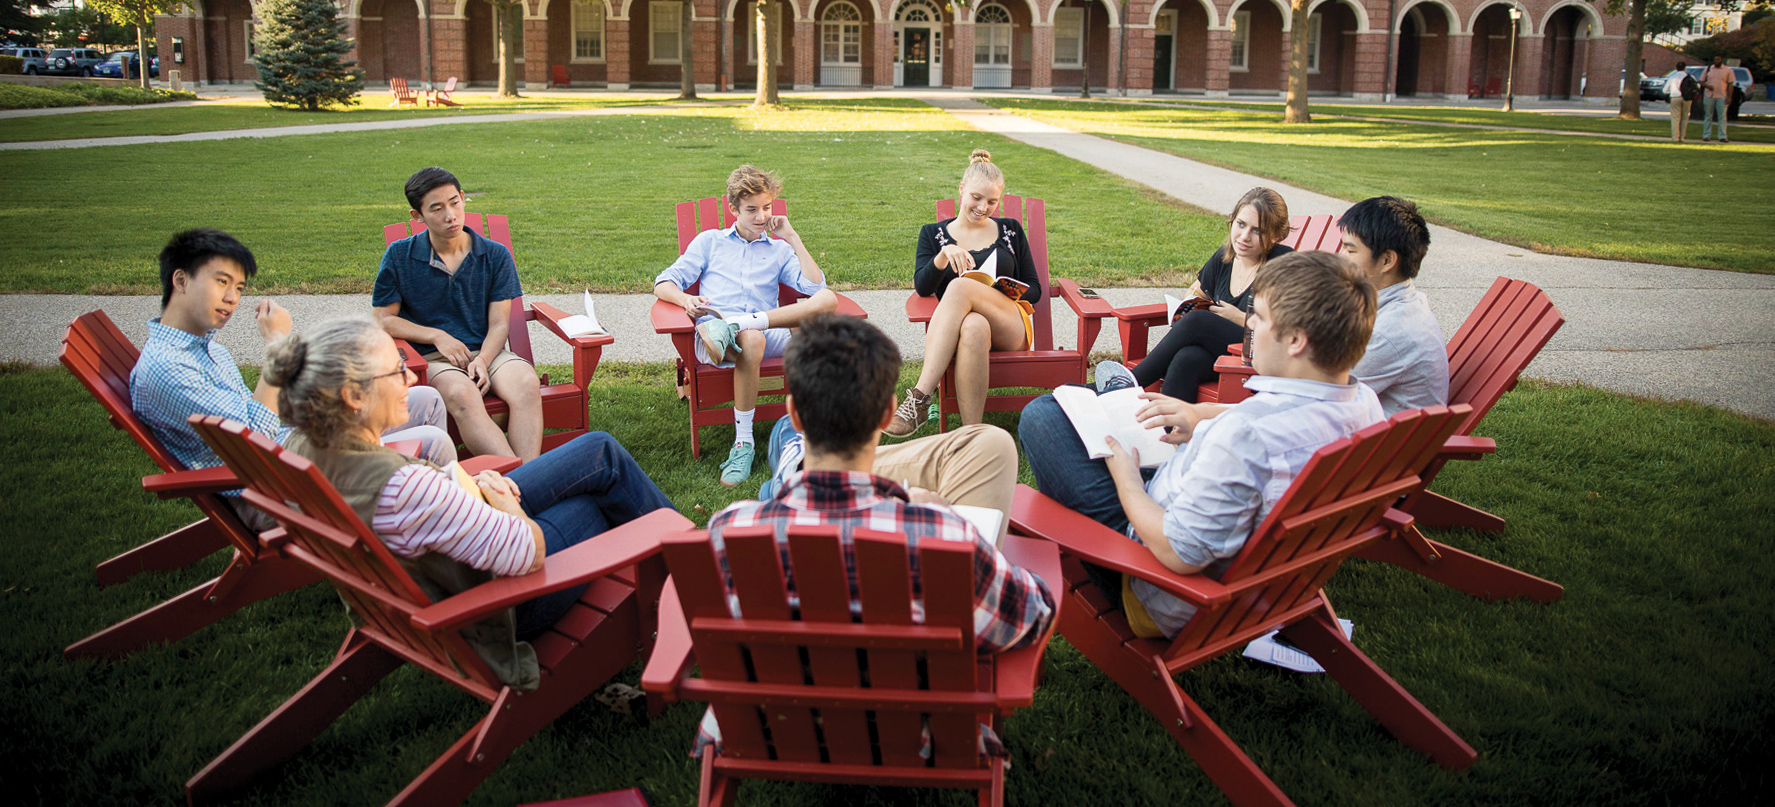 Phillips Exeter Academy students sitting in Adirondack chairs on the quad.